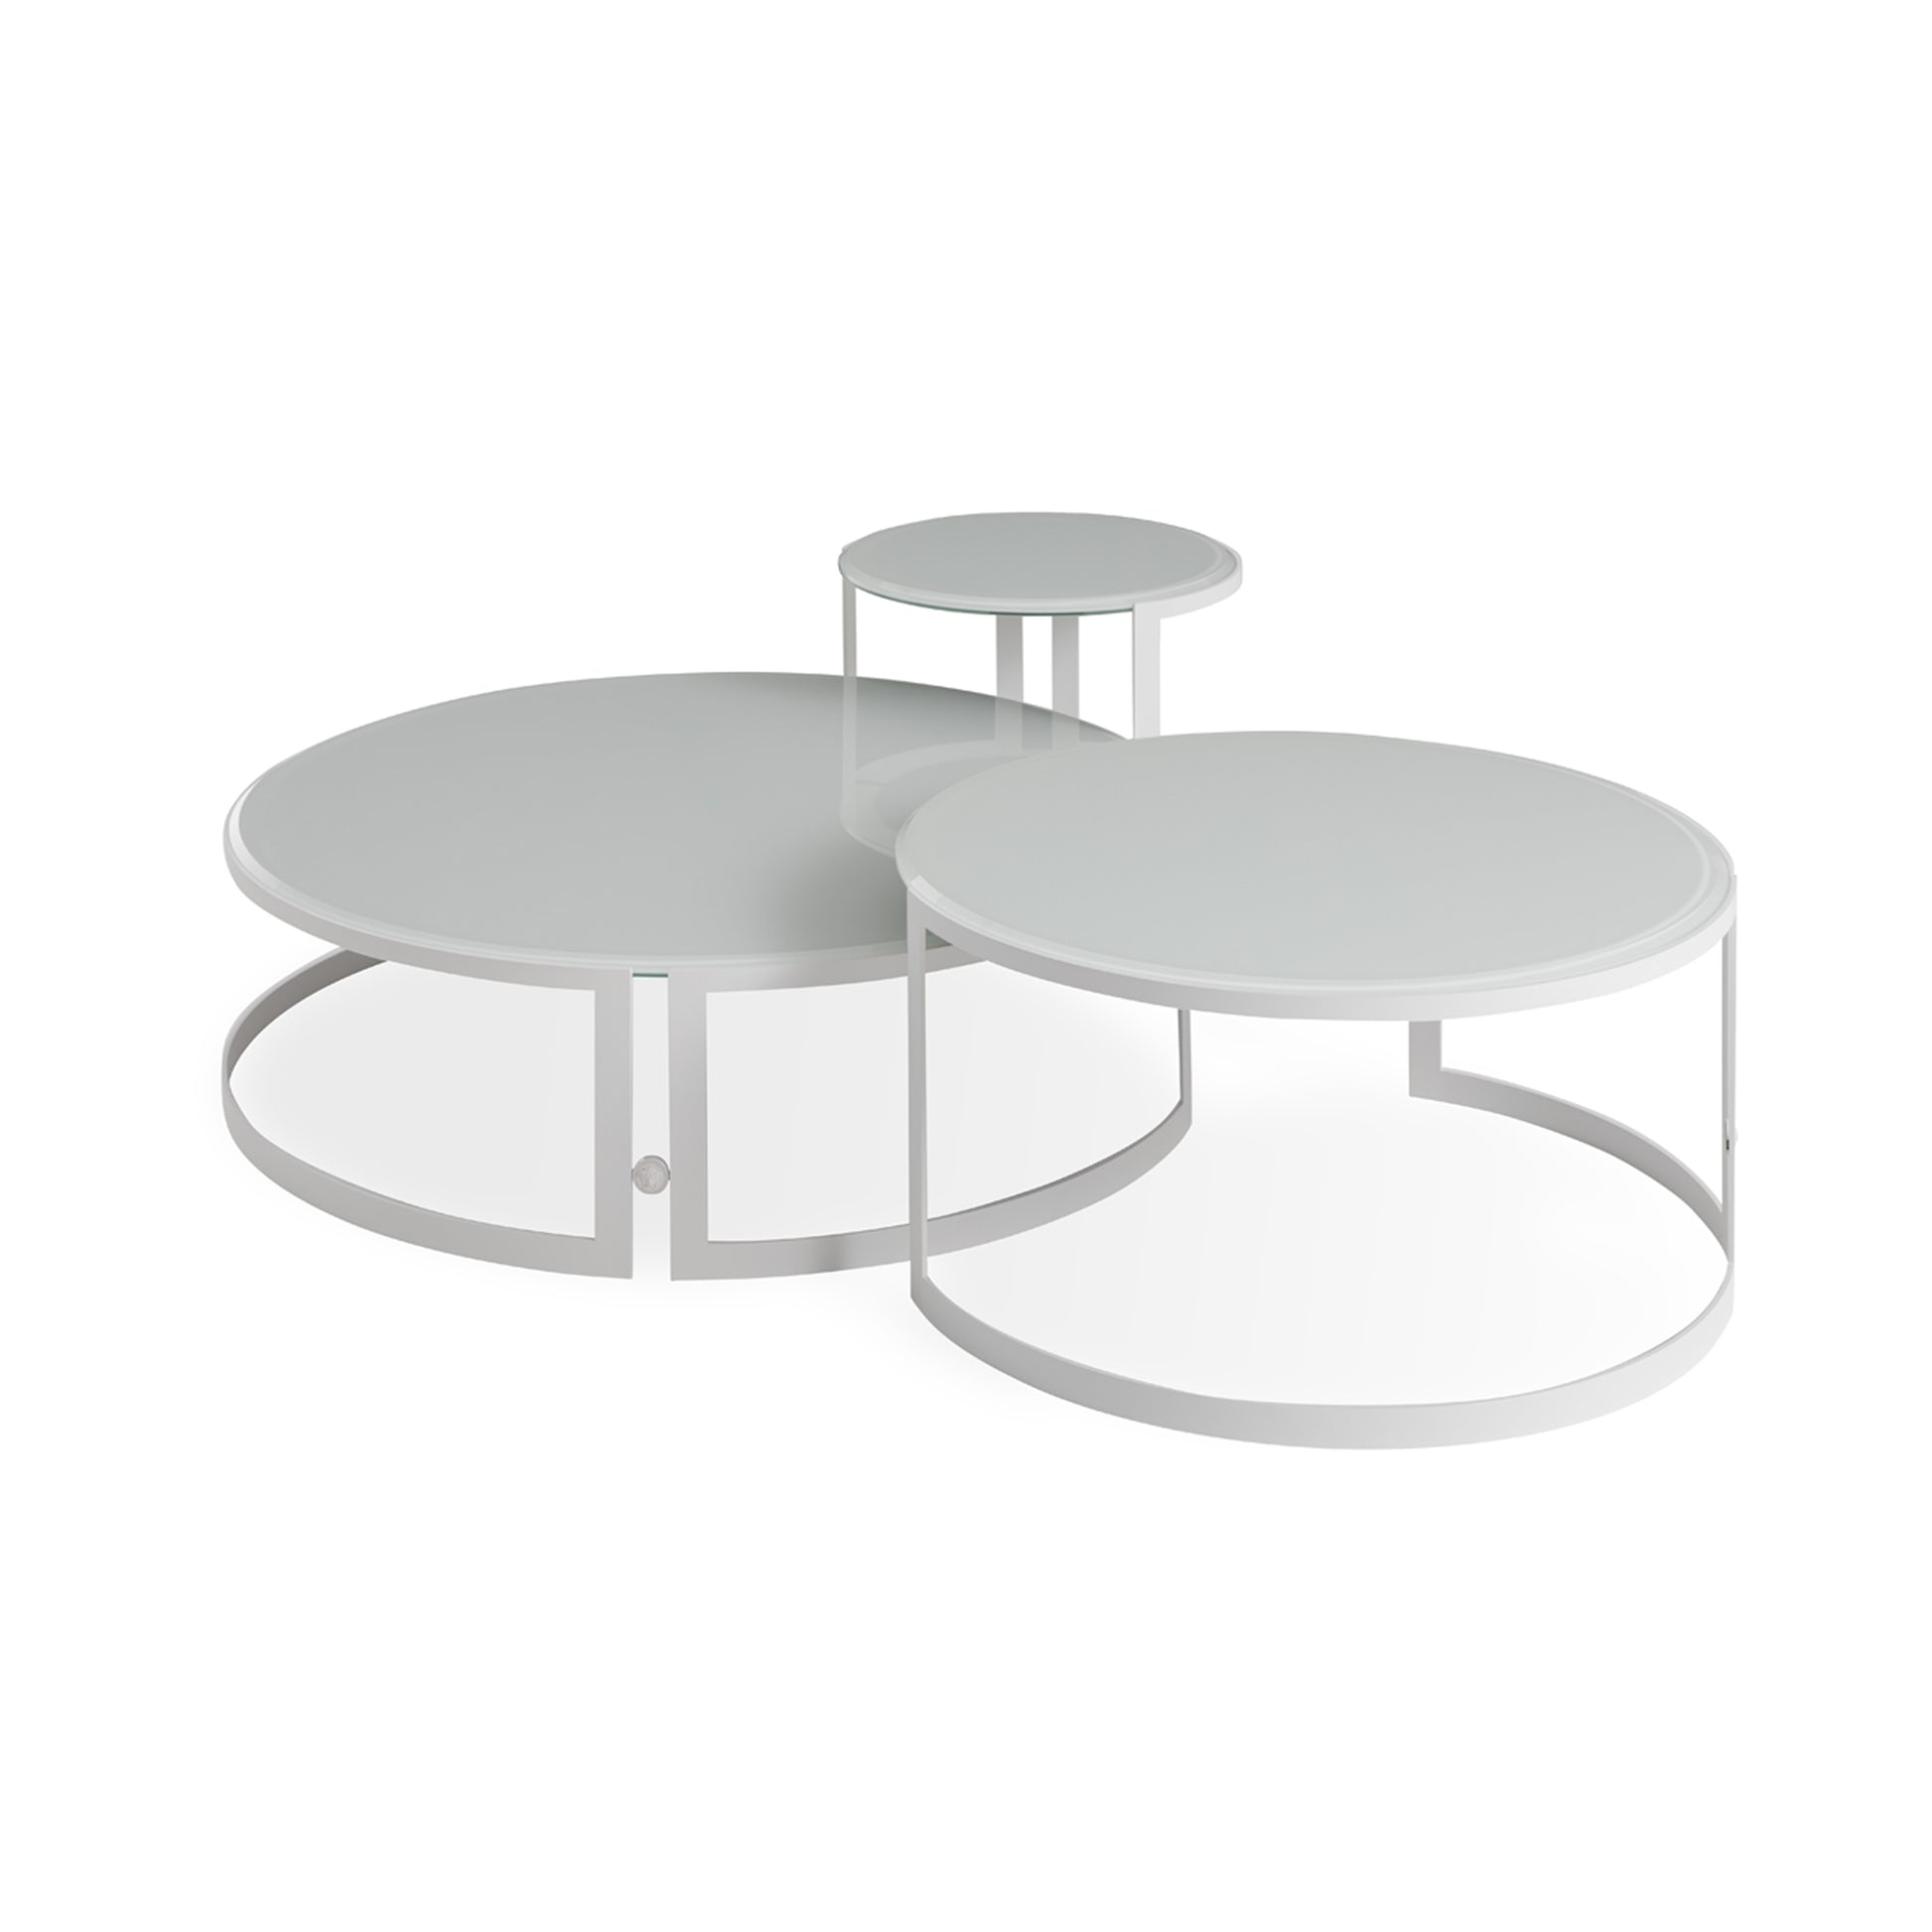 Iconic Round Outdoor coffee table